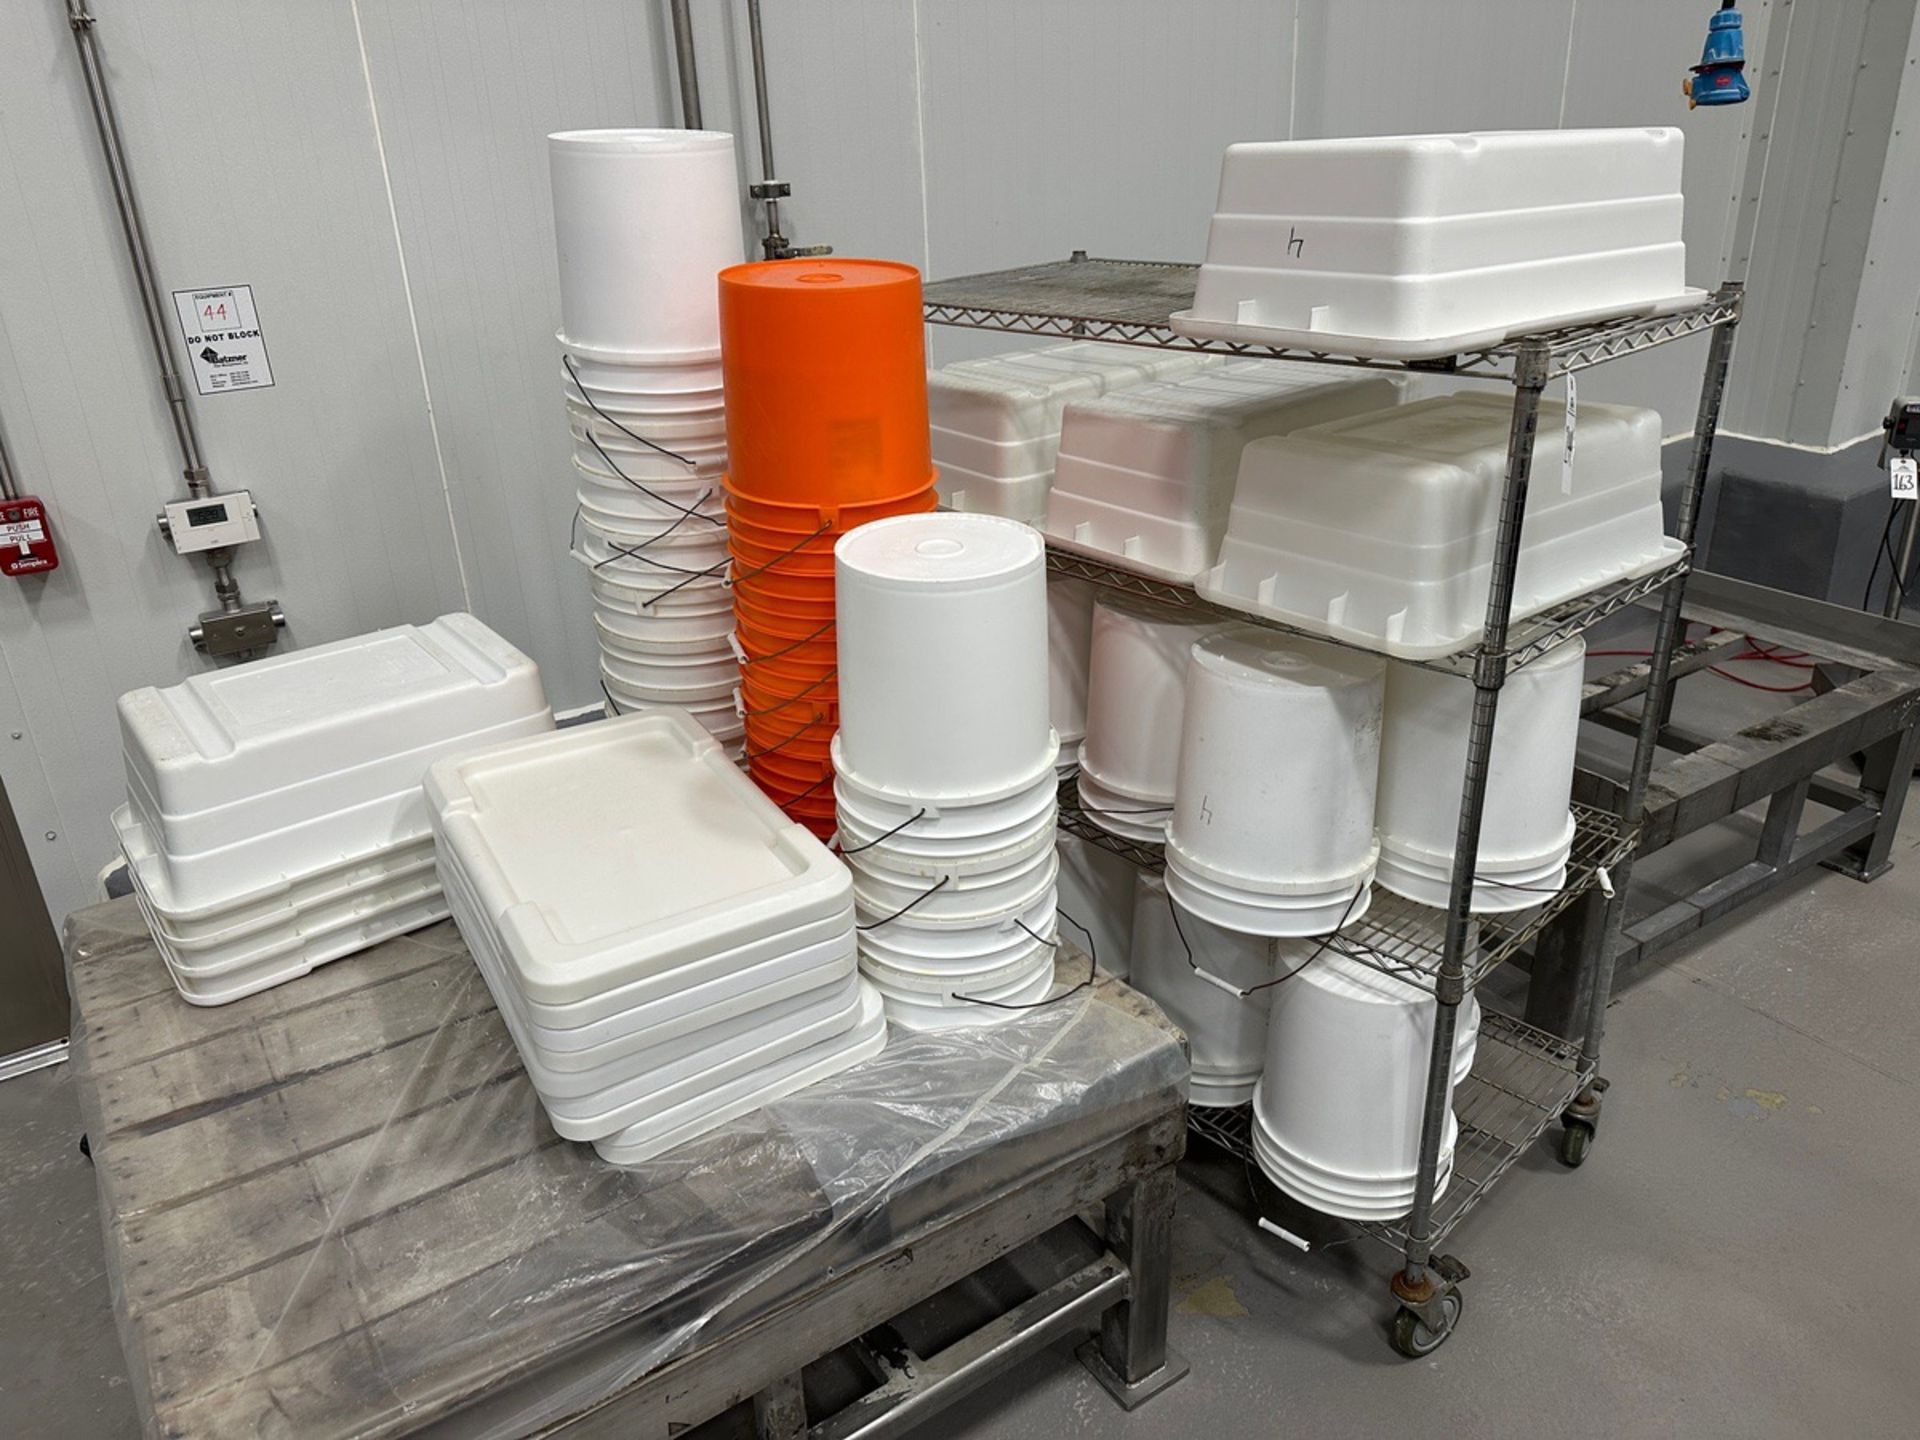 Lot of White Plastic Bins and Buckets with Carts | Rig Fee $75